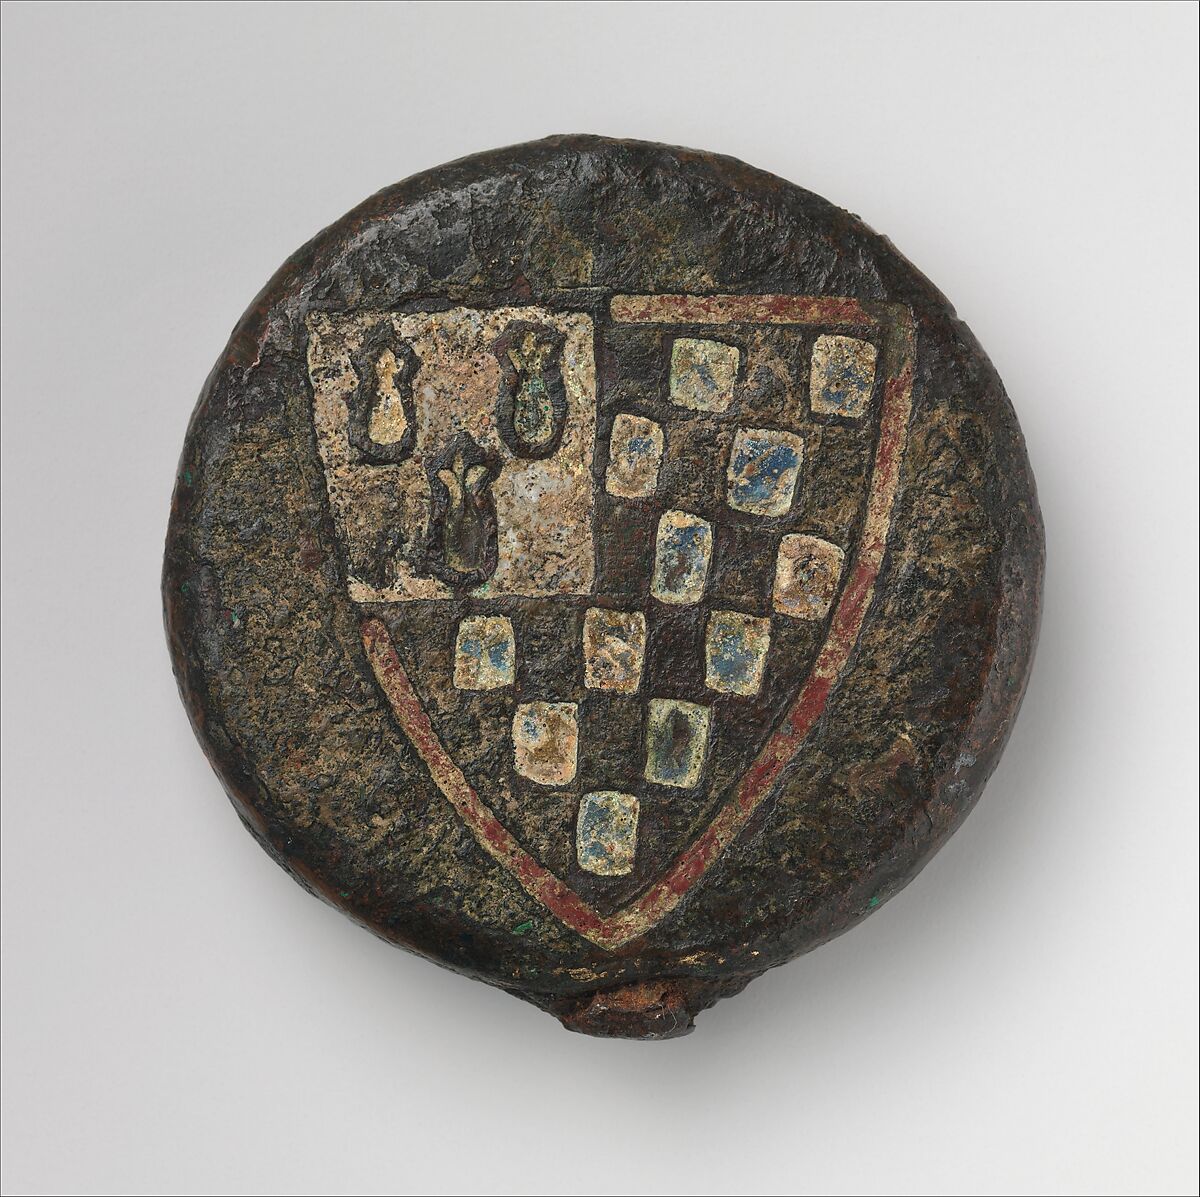 Sword Pommel with the Arms of Pierre de Dreux (ca. 1187–1250), Duke of Brittany and Earl of Richmond, Copper, gold, enamel, iron, French 